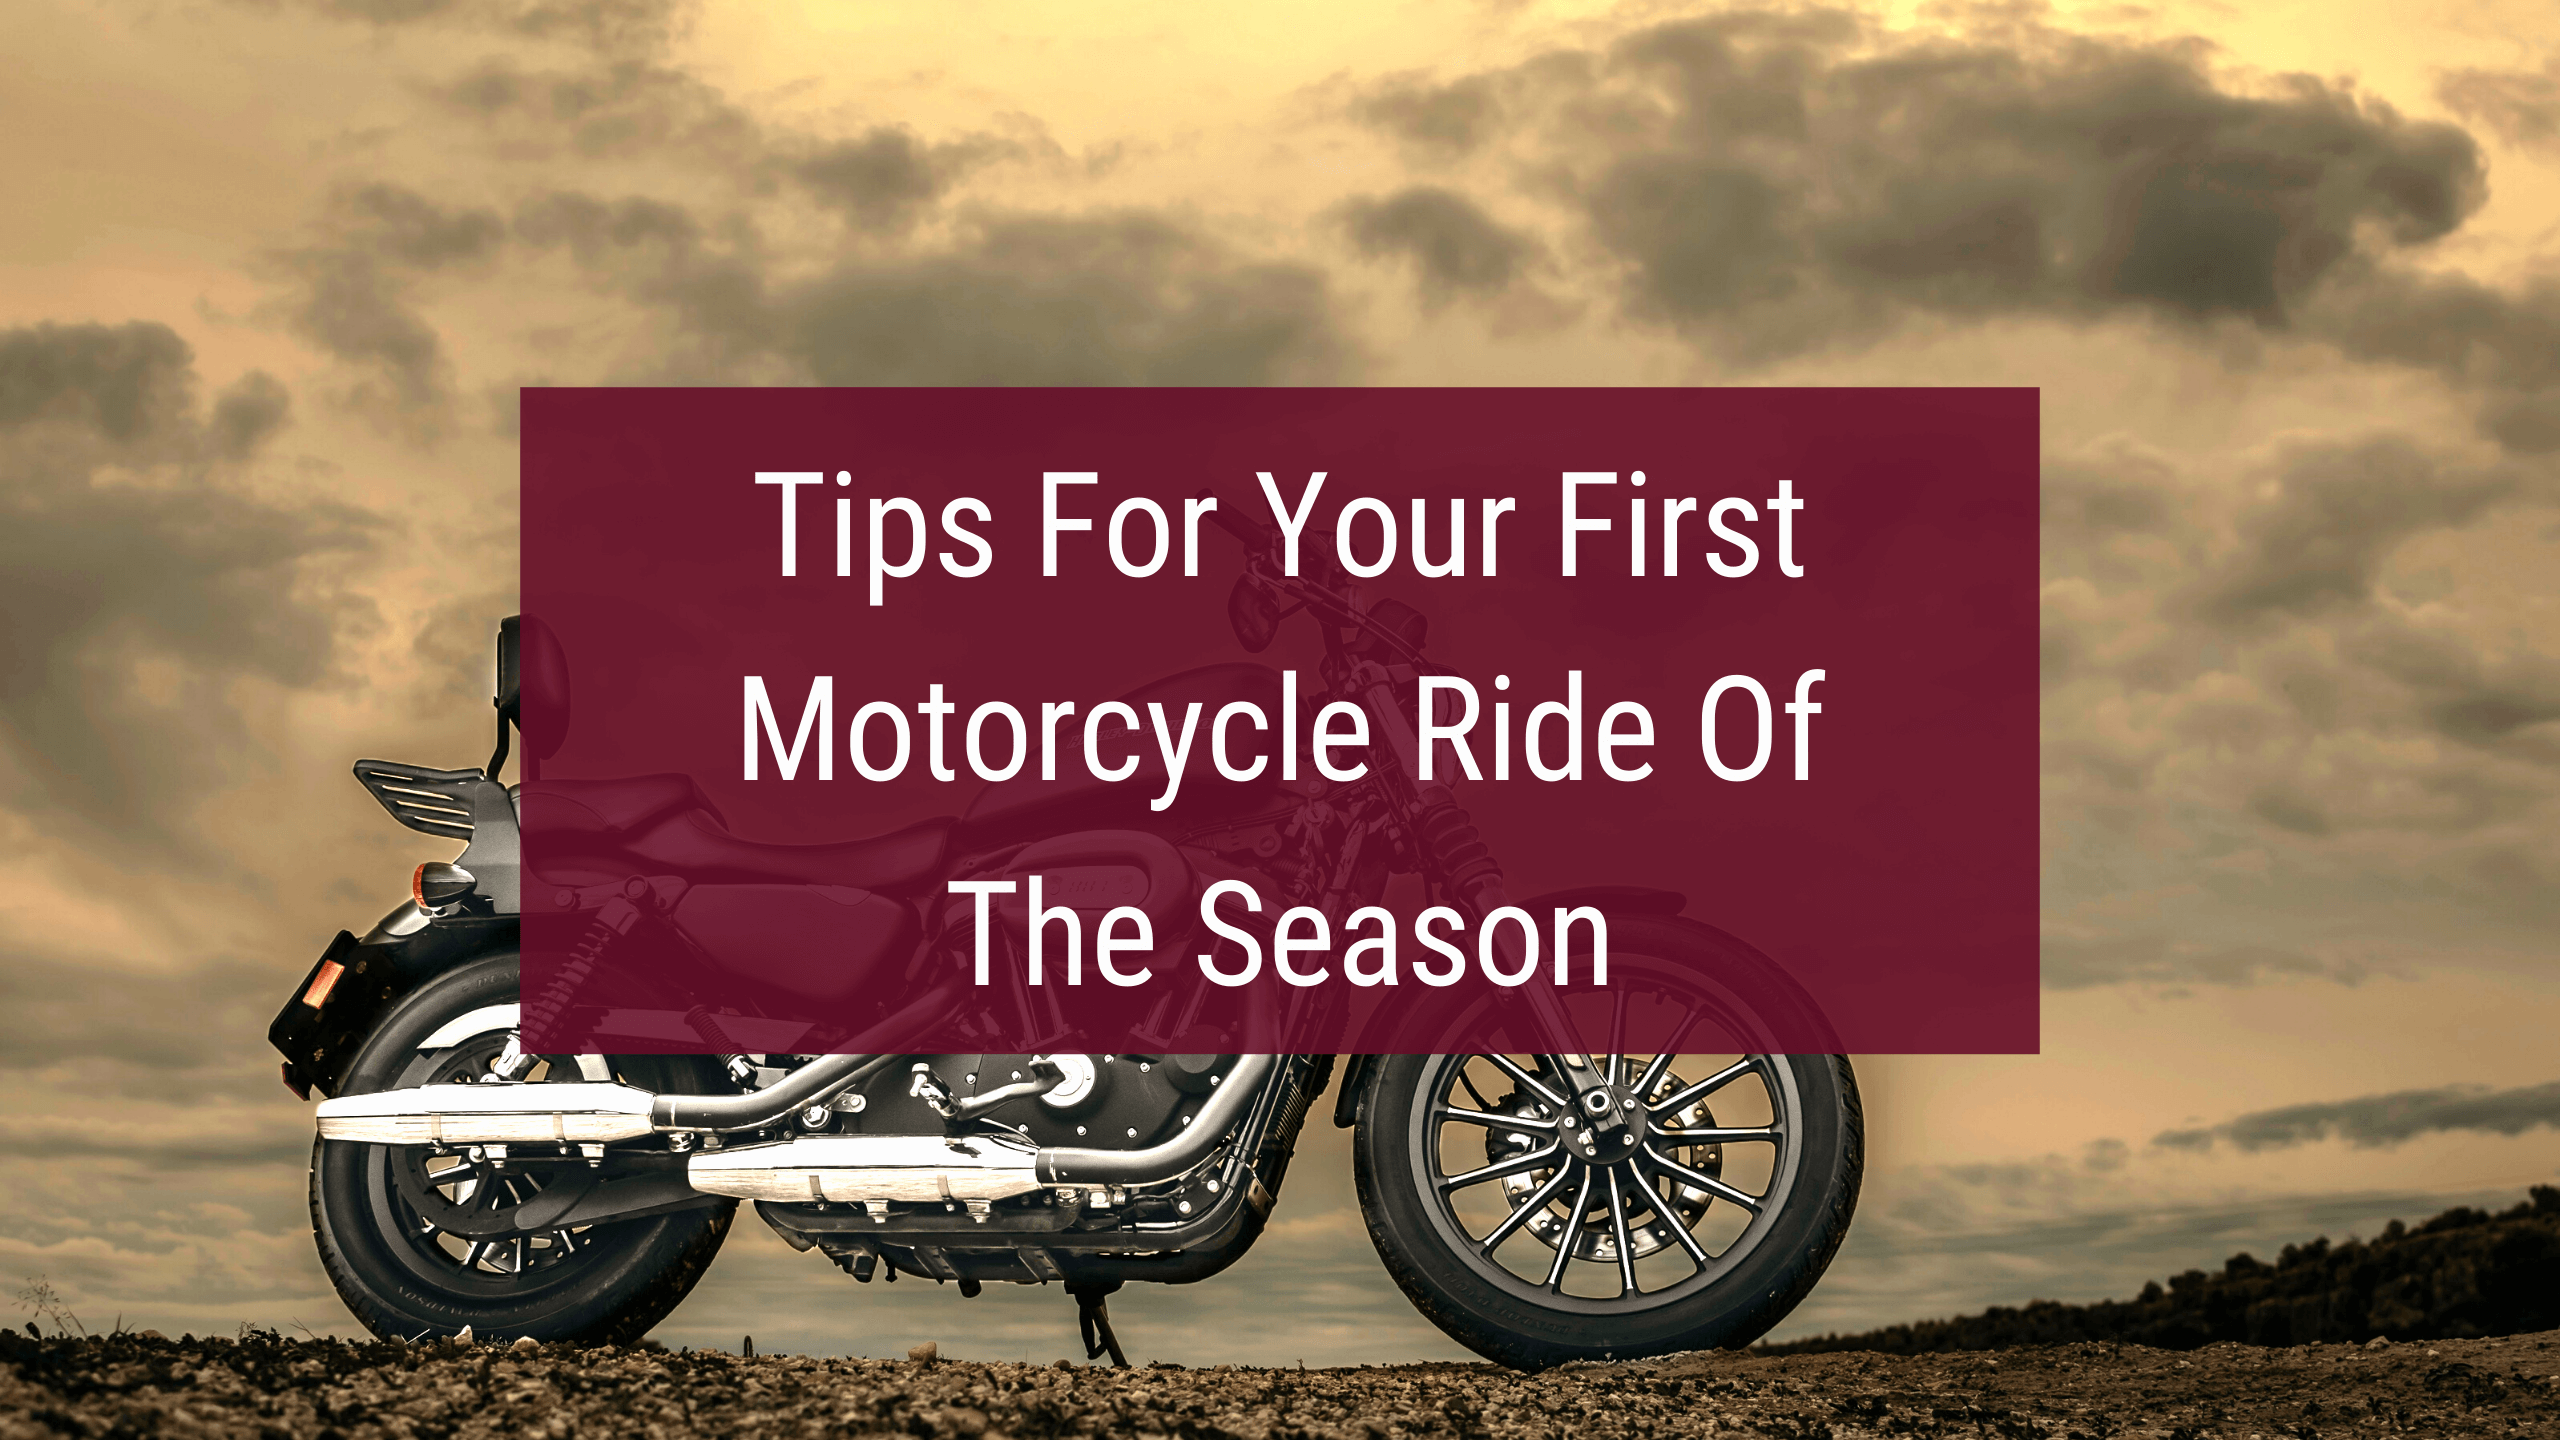 Tips for you 1st motorcycle ride of the season with harley davidson motorcycle.